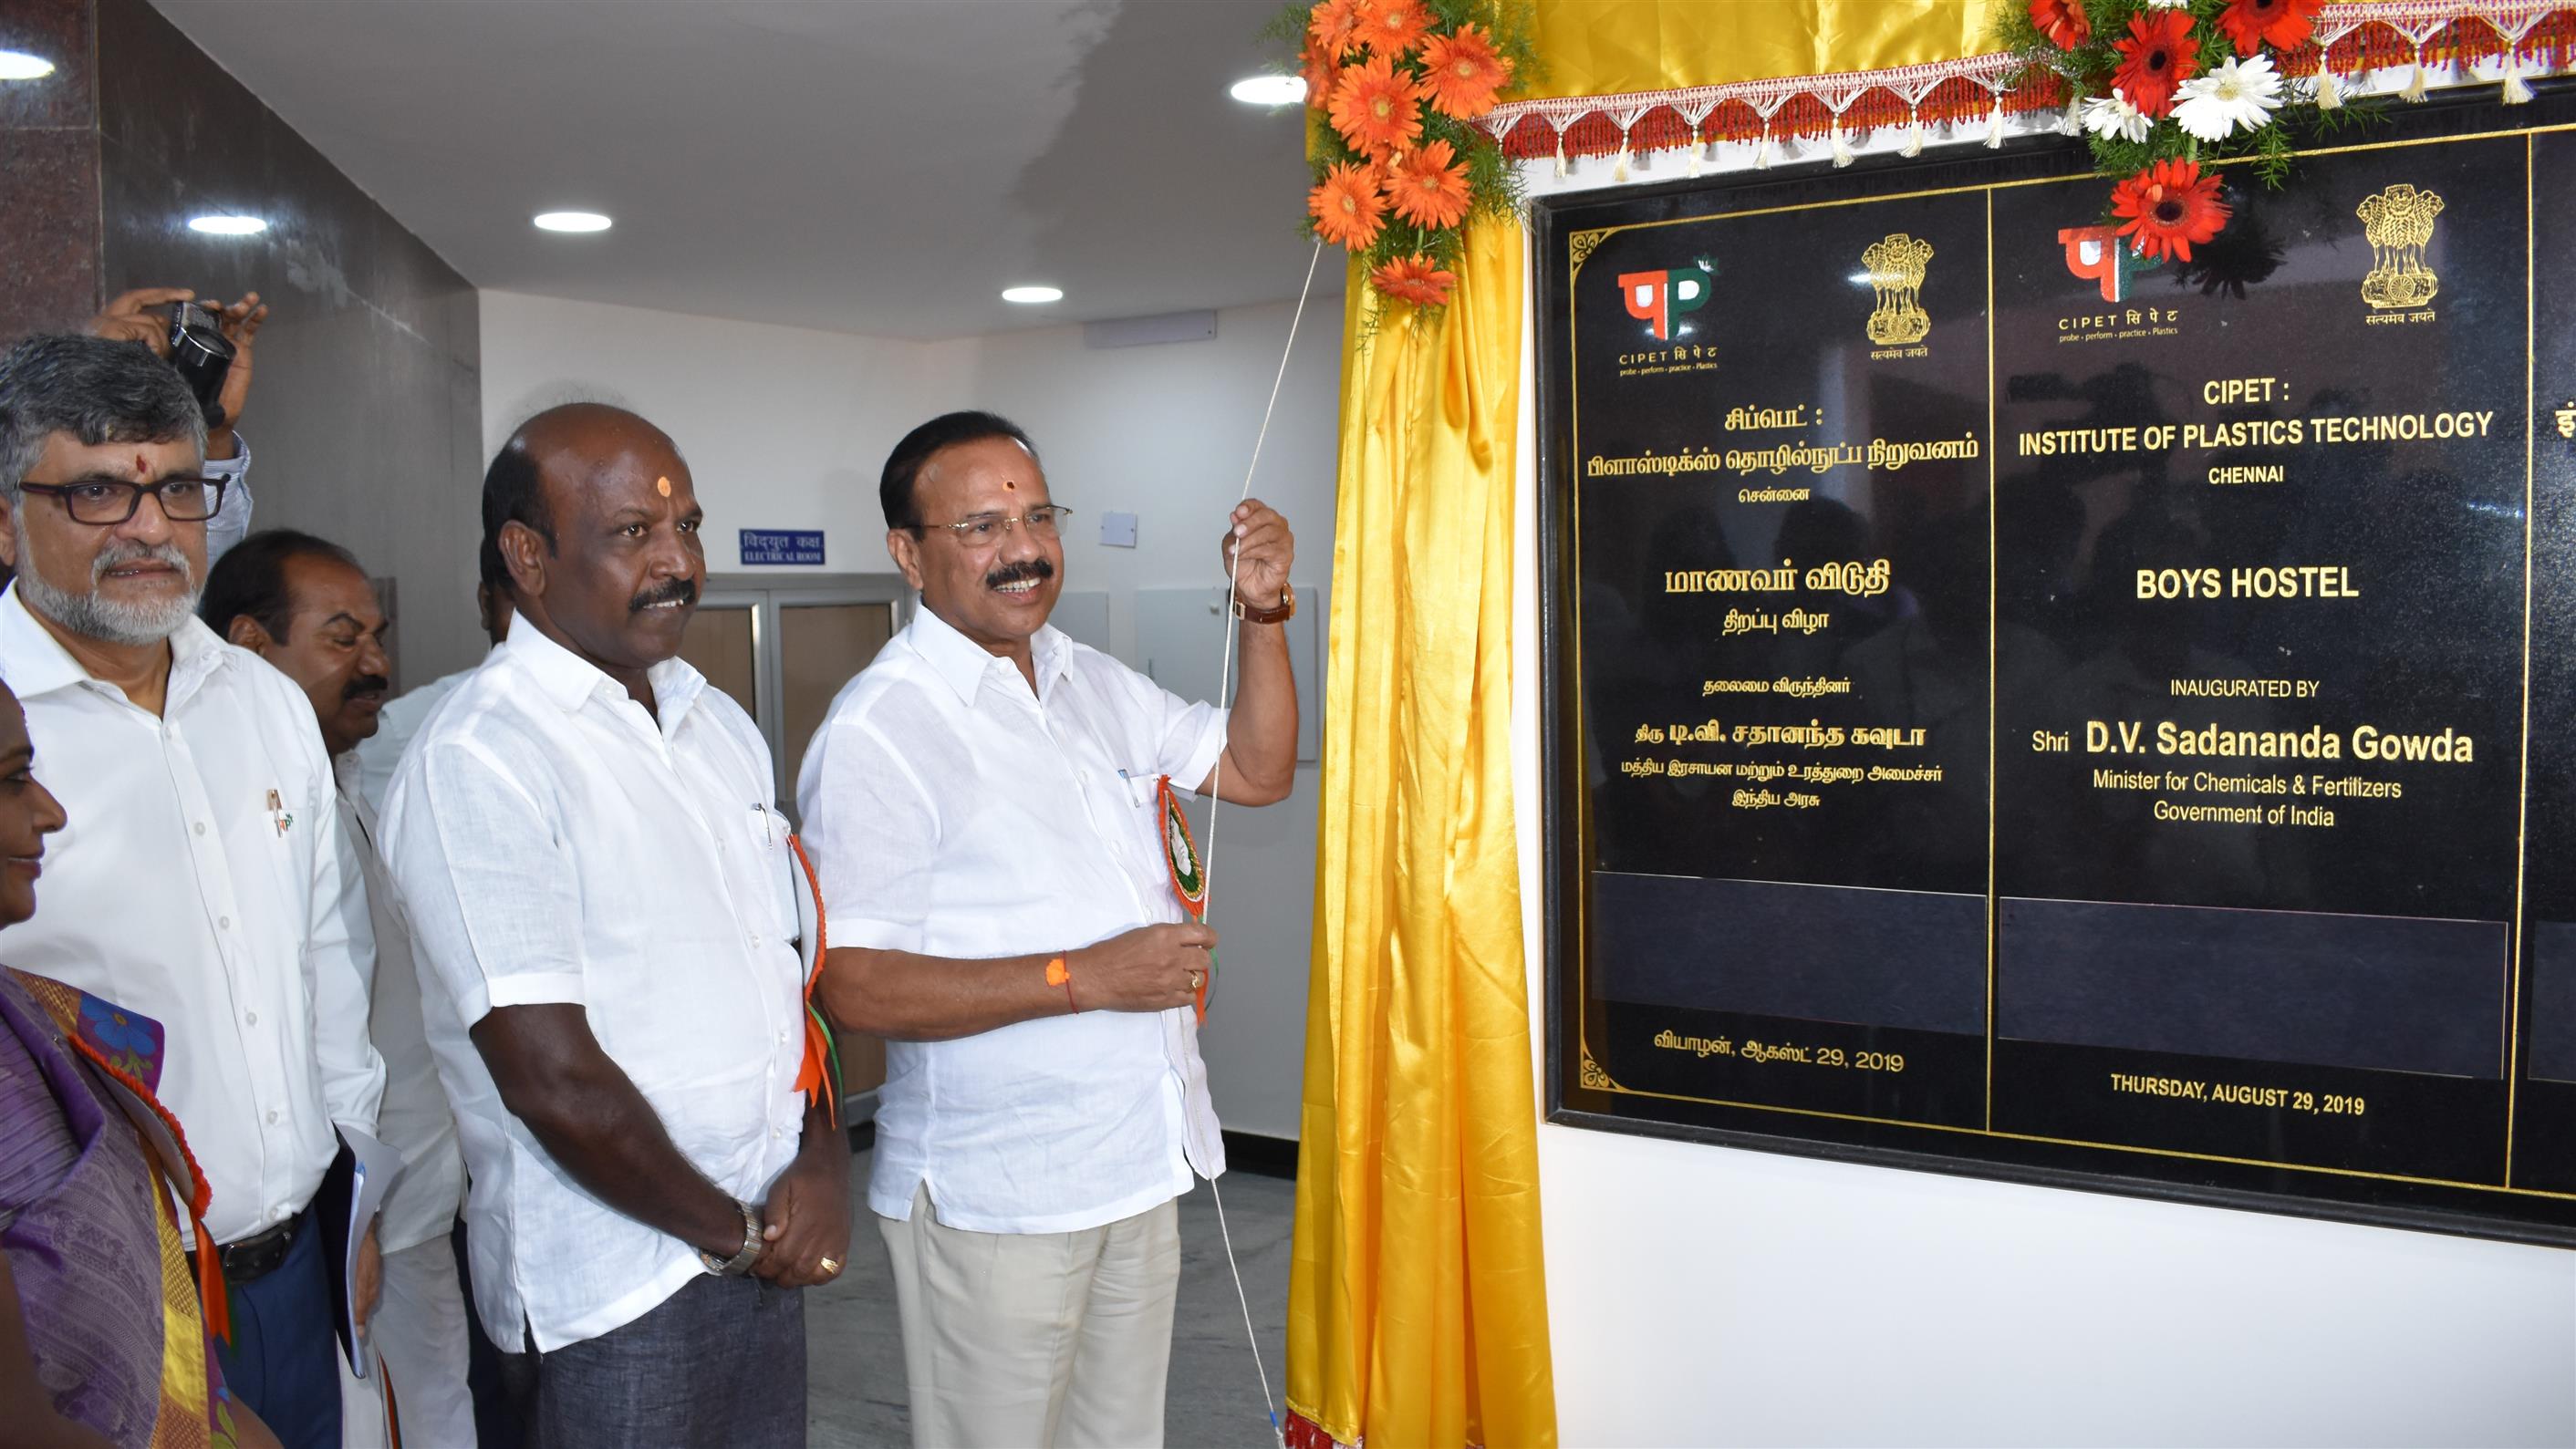 Shri. D. V. Sadananda Gowda, Union Minister for Chemicals & Fertilizers unveiling the plaque during the inauguration of the Boys Hostel of the CIPET: Institute of Plastics Technology, Deptt. Of Chemicals & Petrochemicals, Ministry of Chemicals & Fertilizers at Chennai, today (August 29, 2019)  